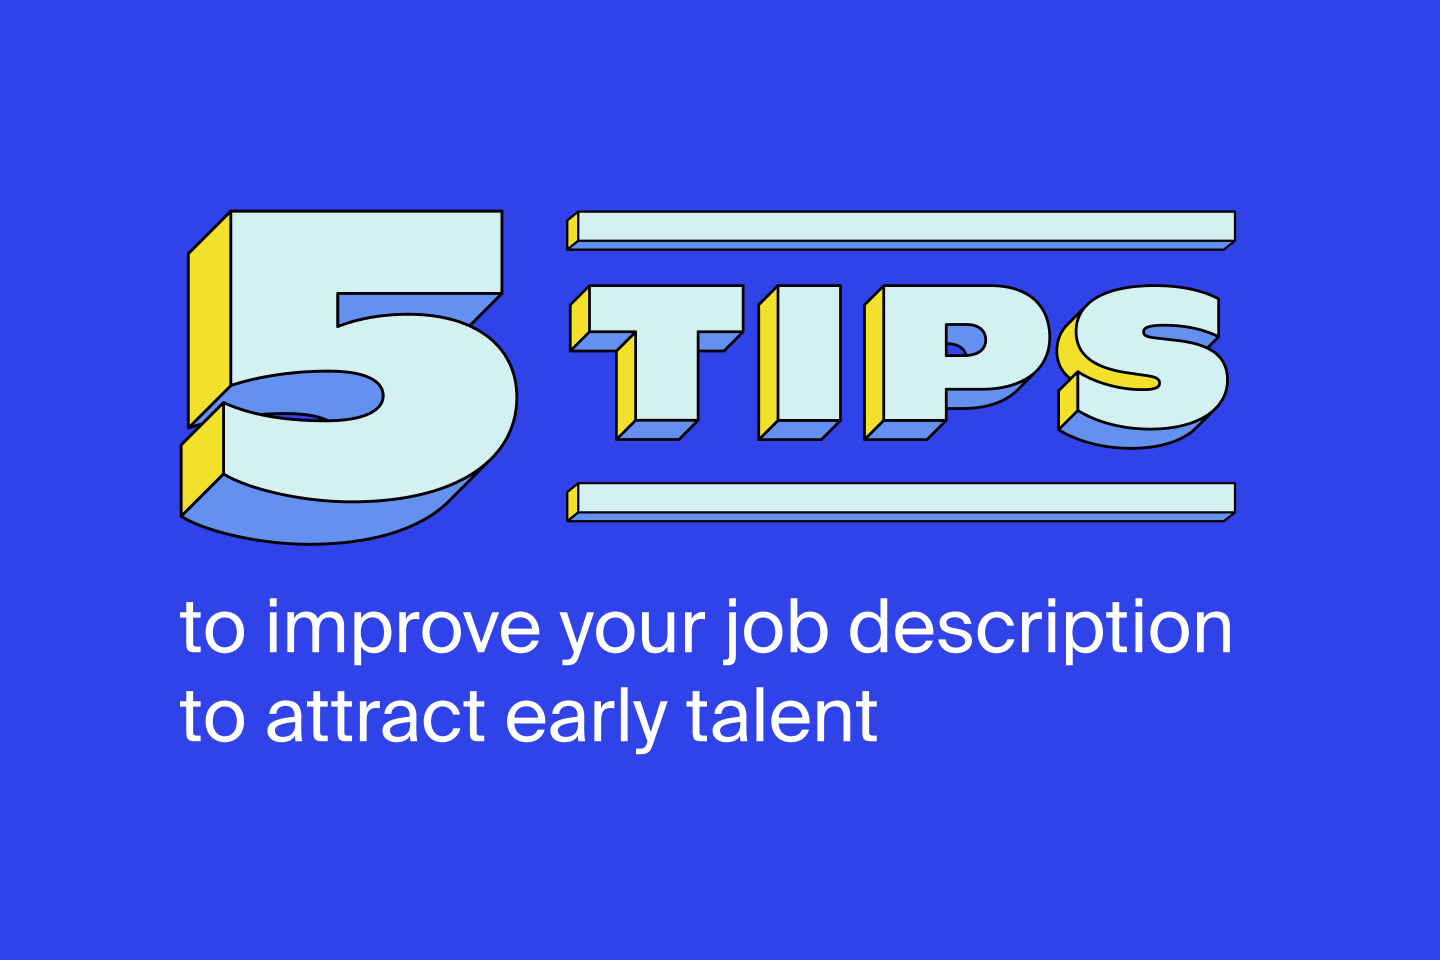 5 Tips to improve your job description to attract early talent